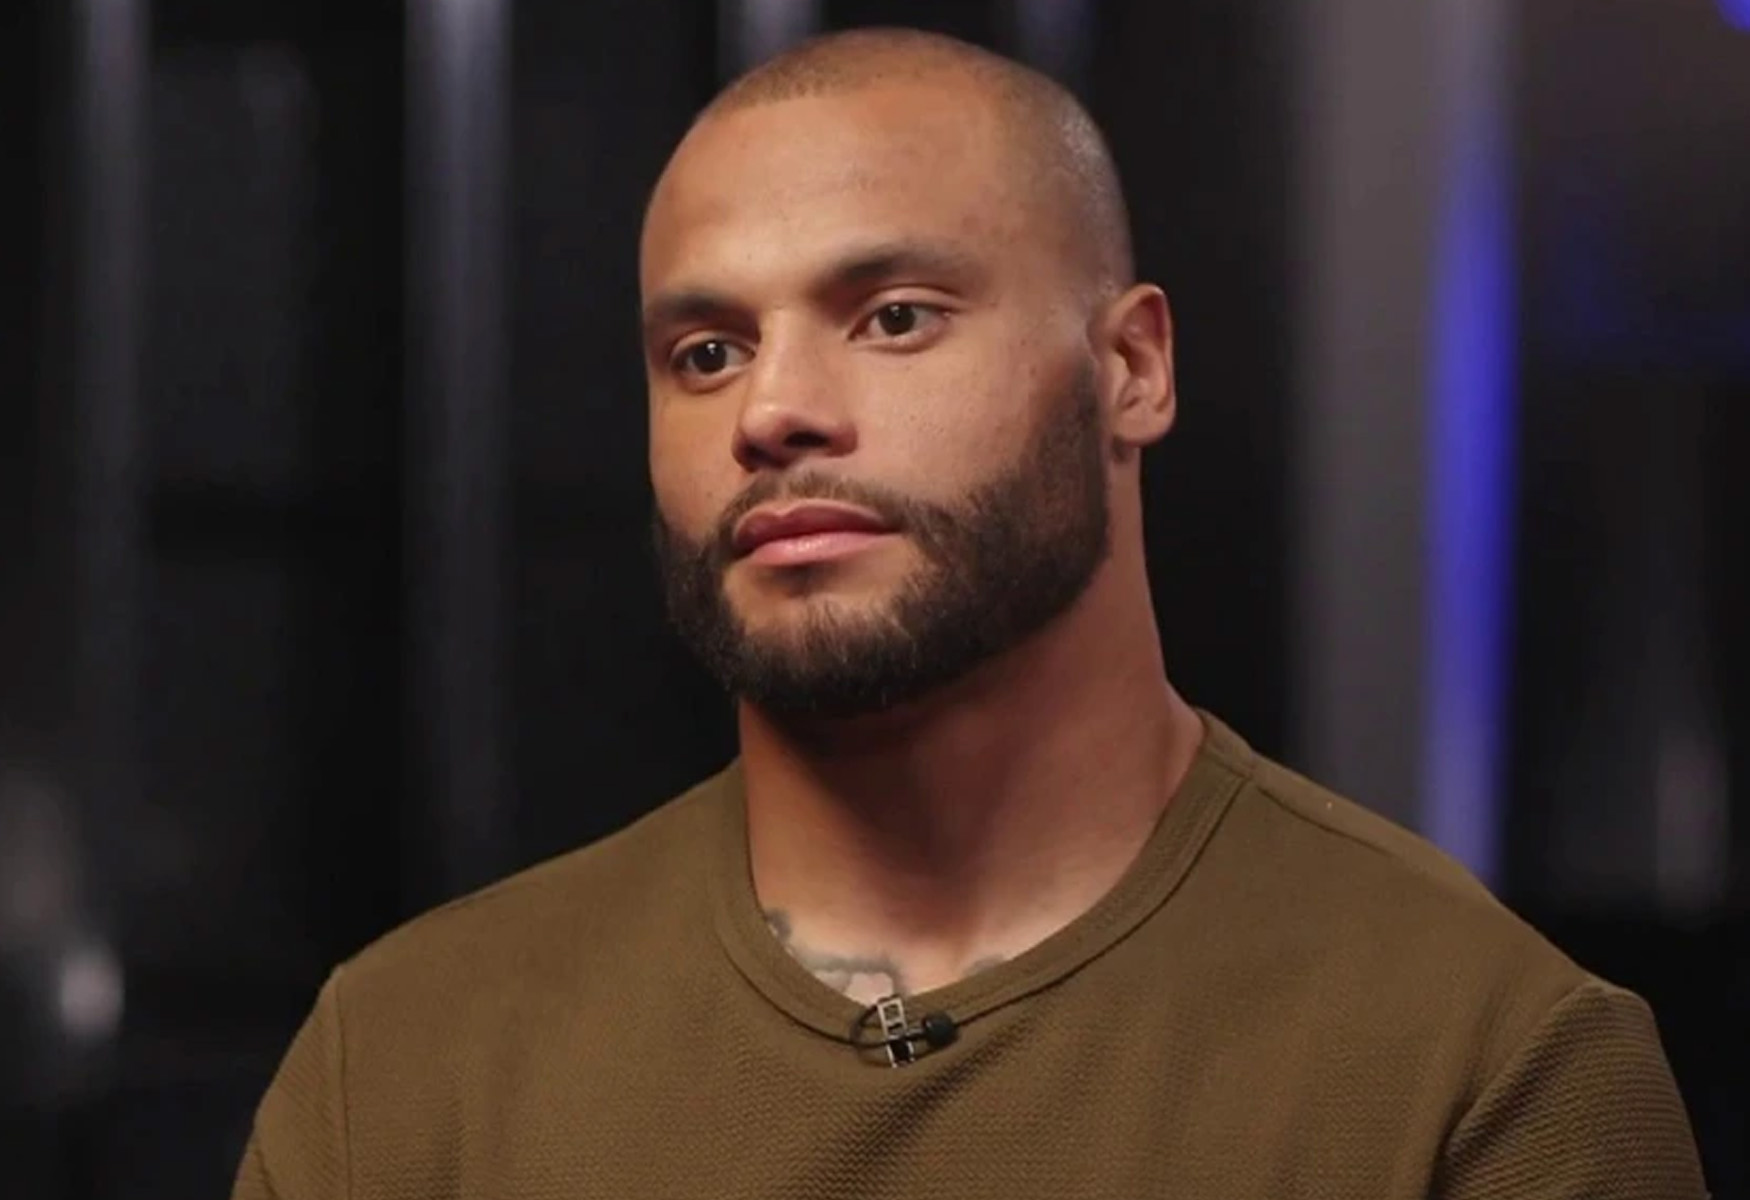 new-campaign-by-dak-prescott-raises-colorectal-cancer-awareness-with-a-dash-of-humor